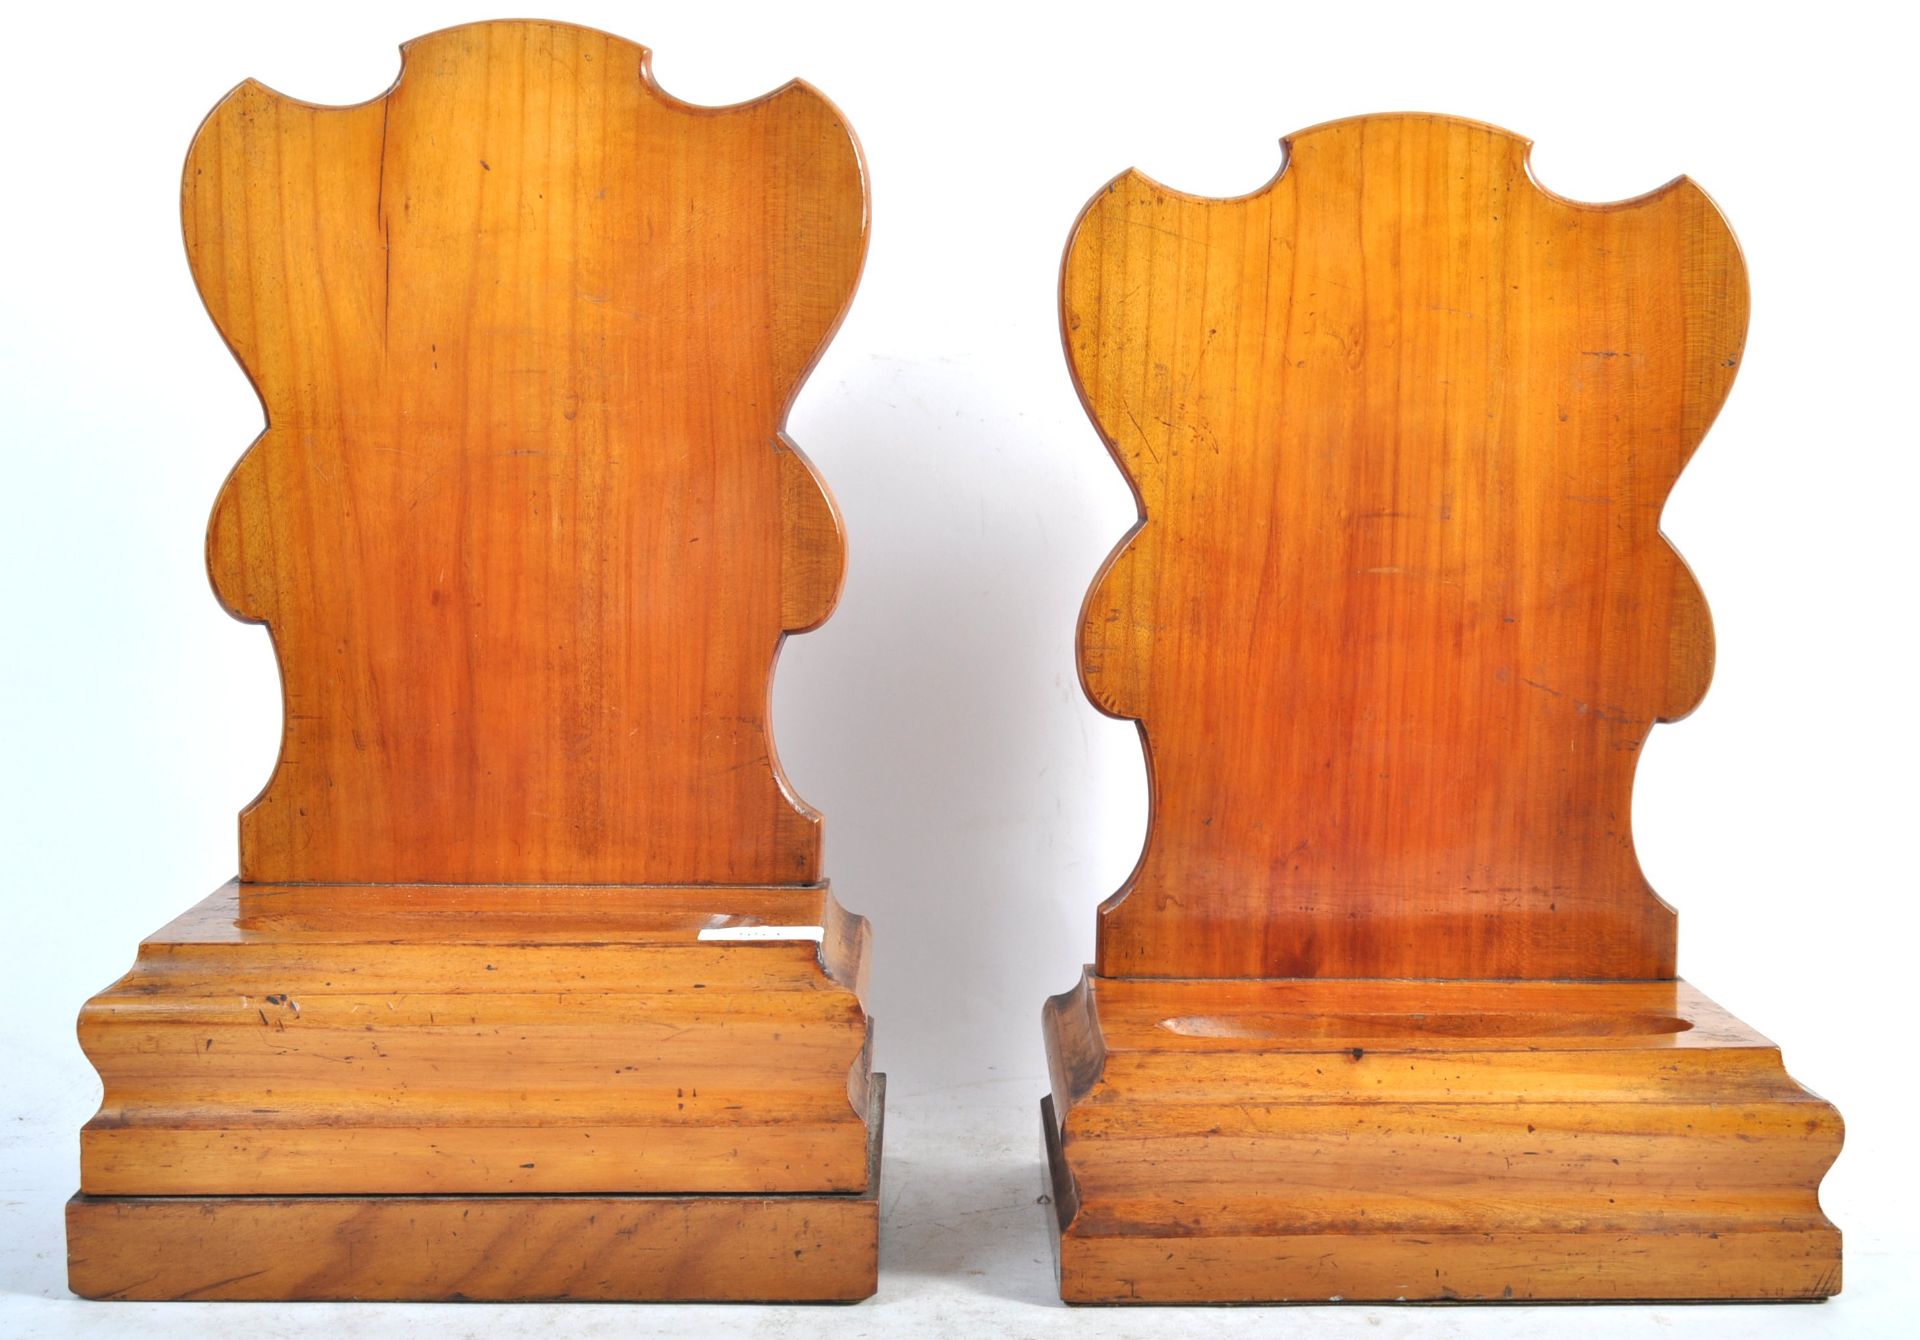 PAIR OF LATE 18TH CENTURY GEORGIAN ANTIQUE SATINWOOD PLATE STANDS